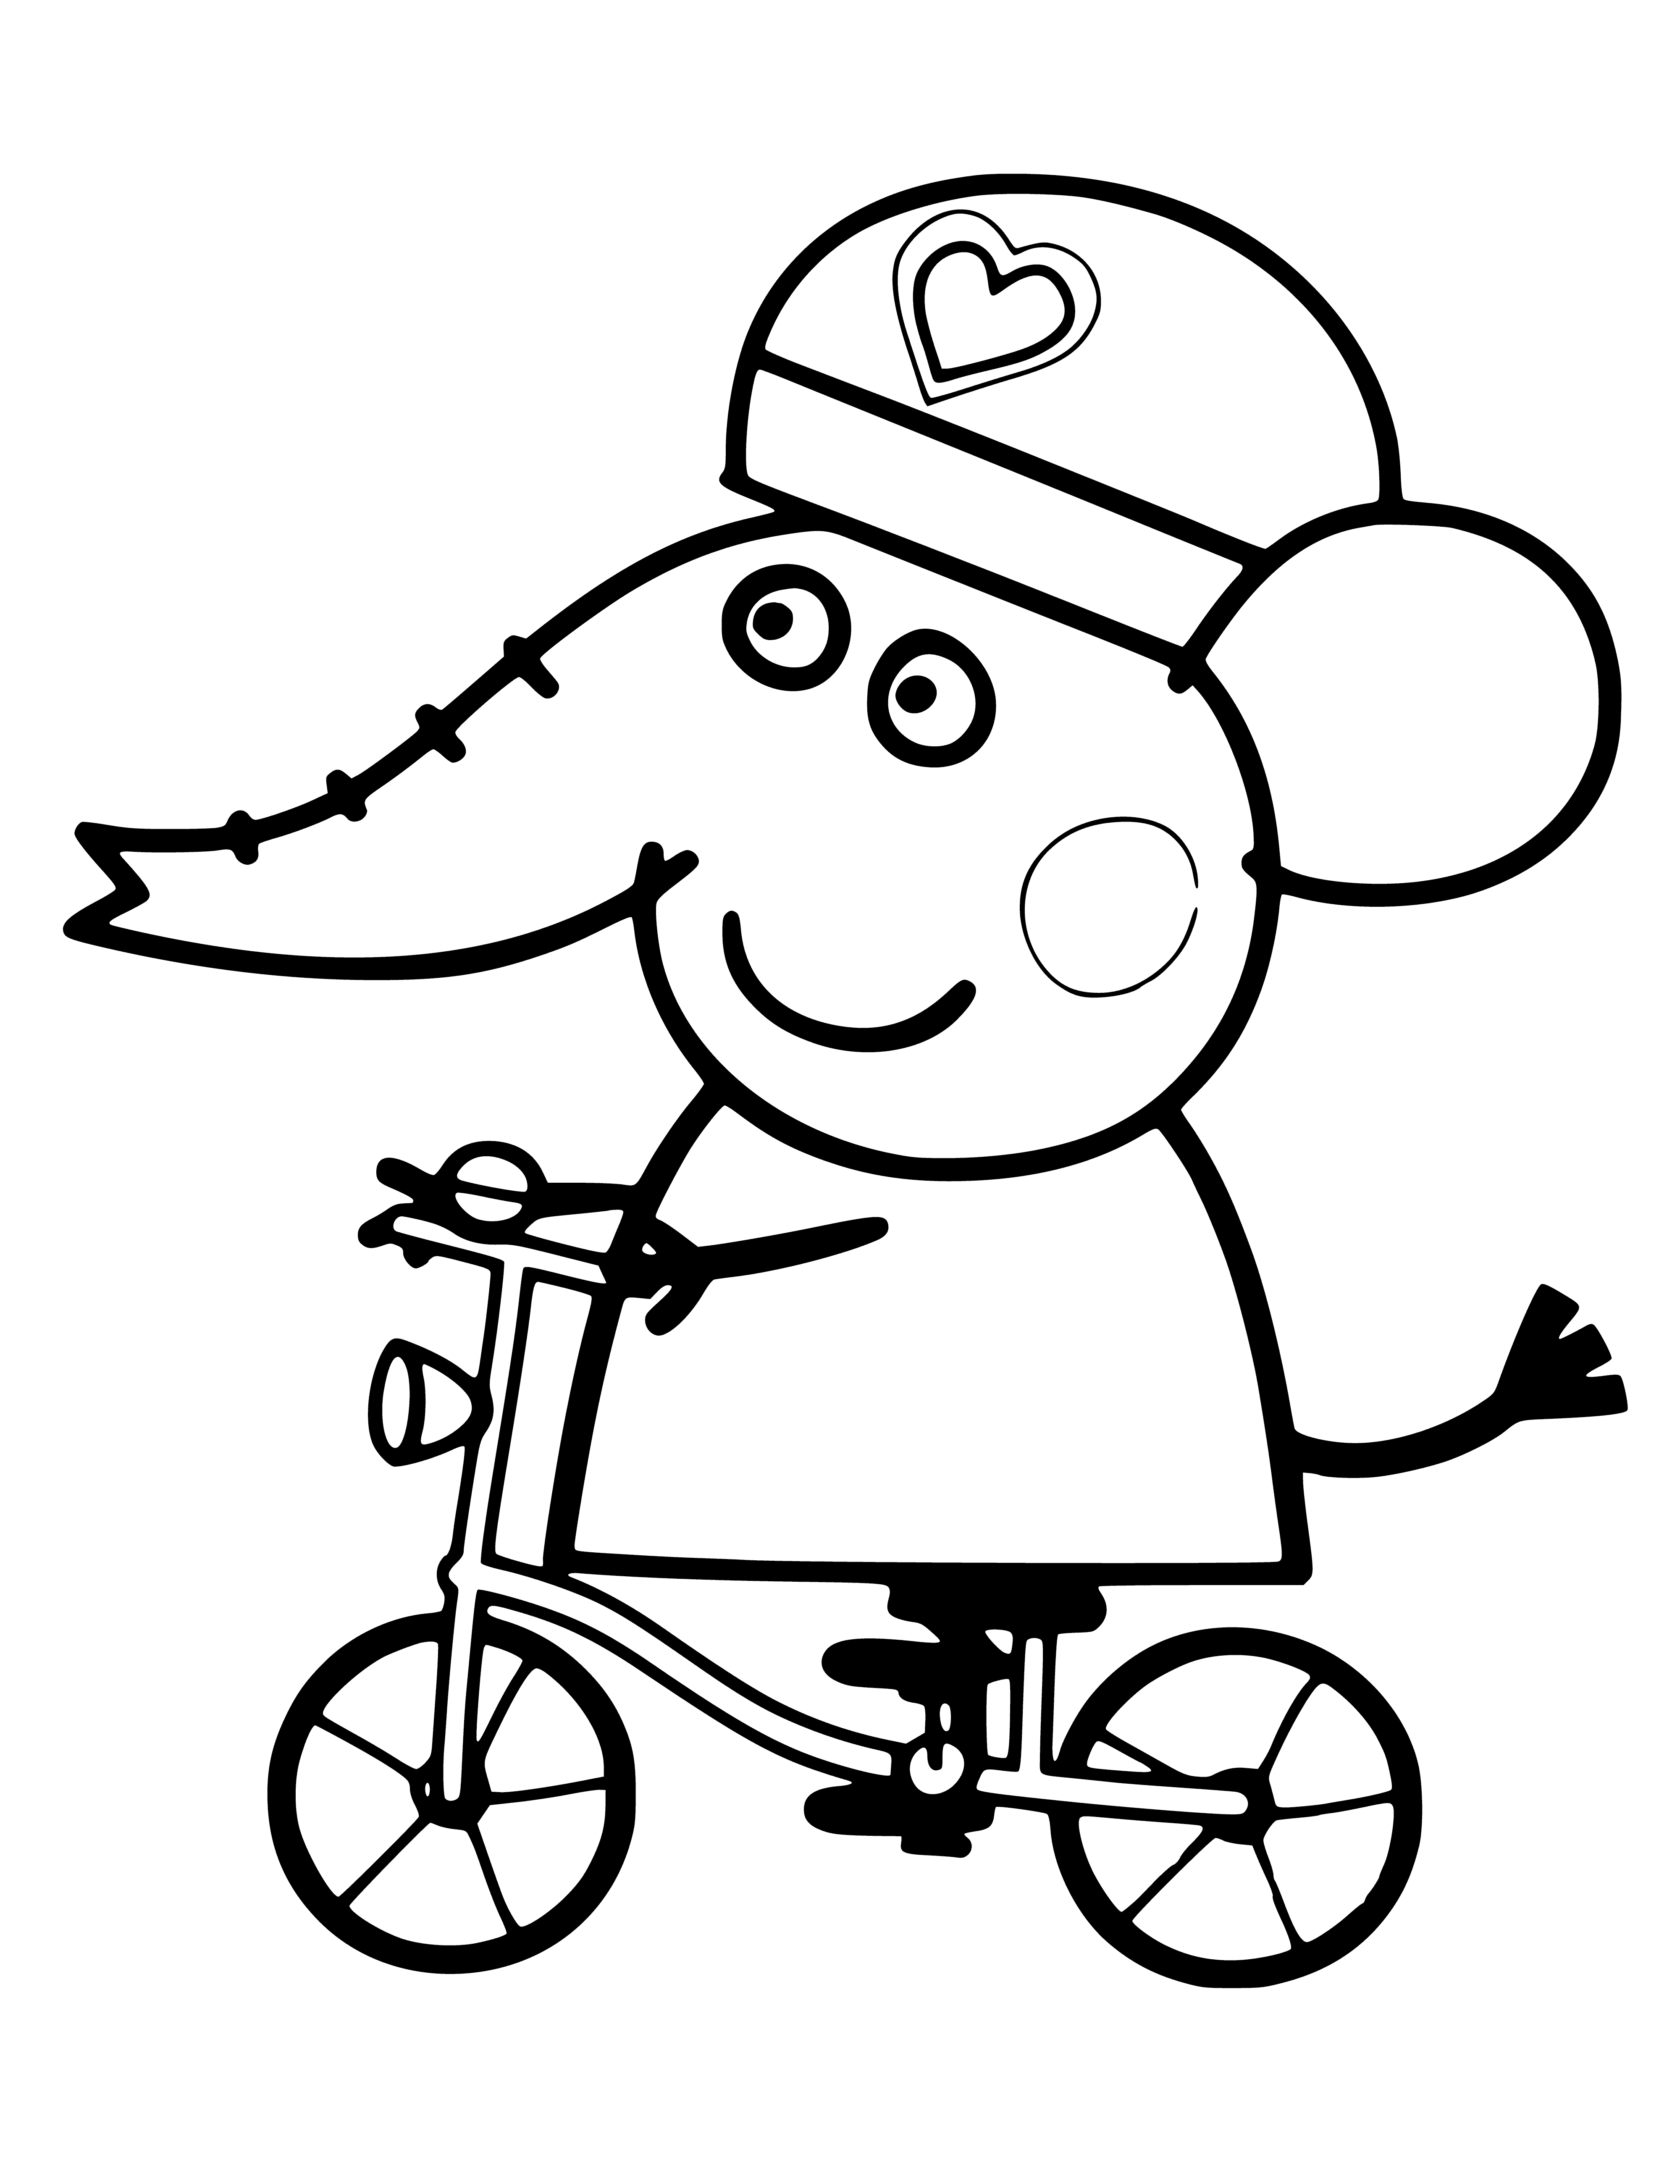 coloring page: Peppa & Emily are riding bikes, they both have helmets & Peppa has a bell. Both smiling & having fun.